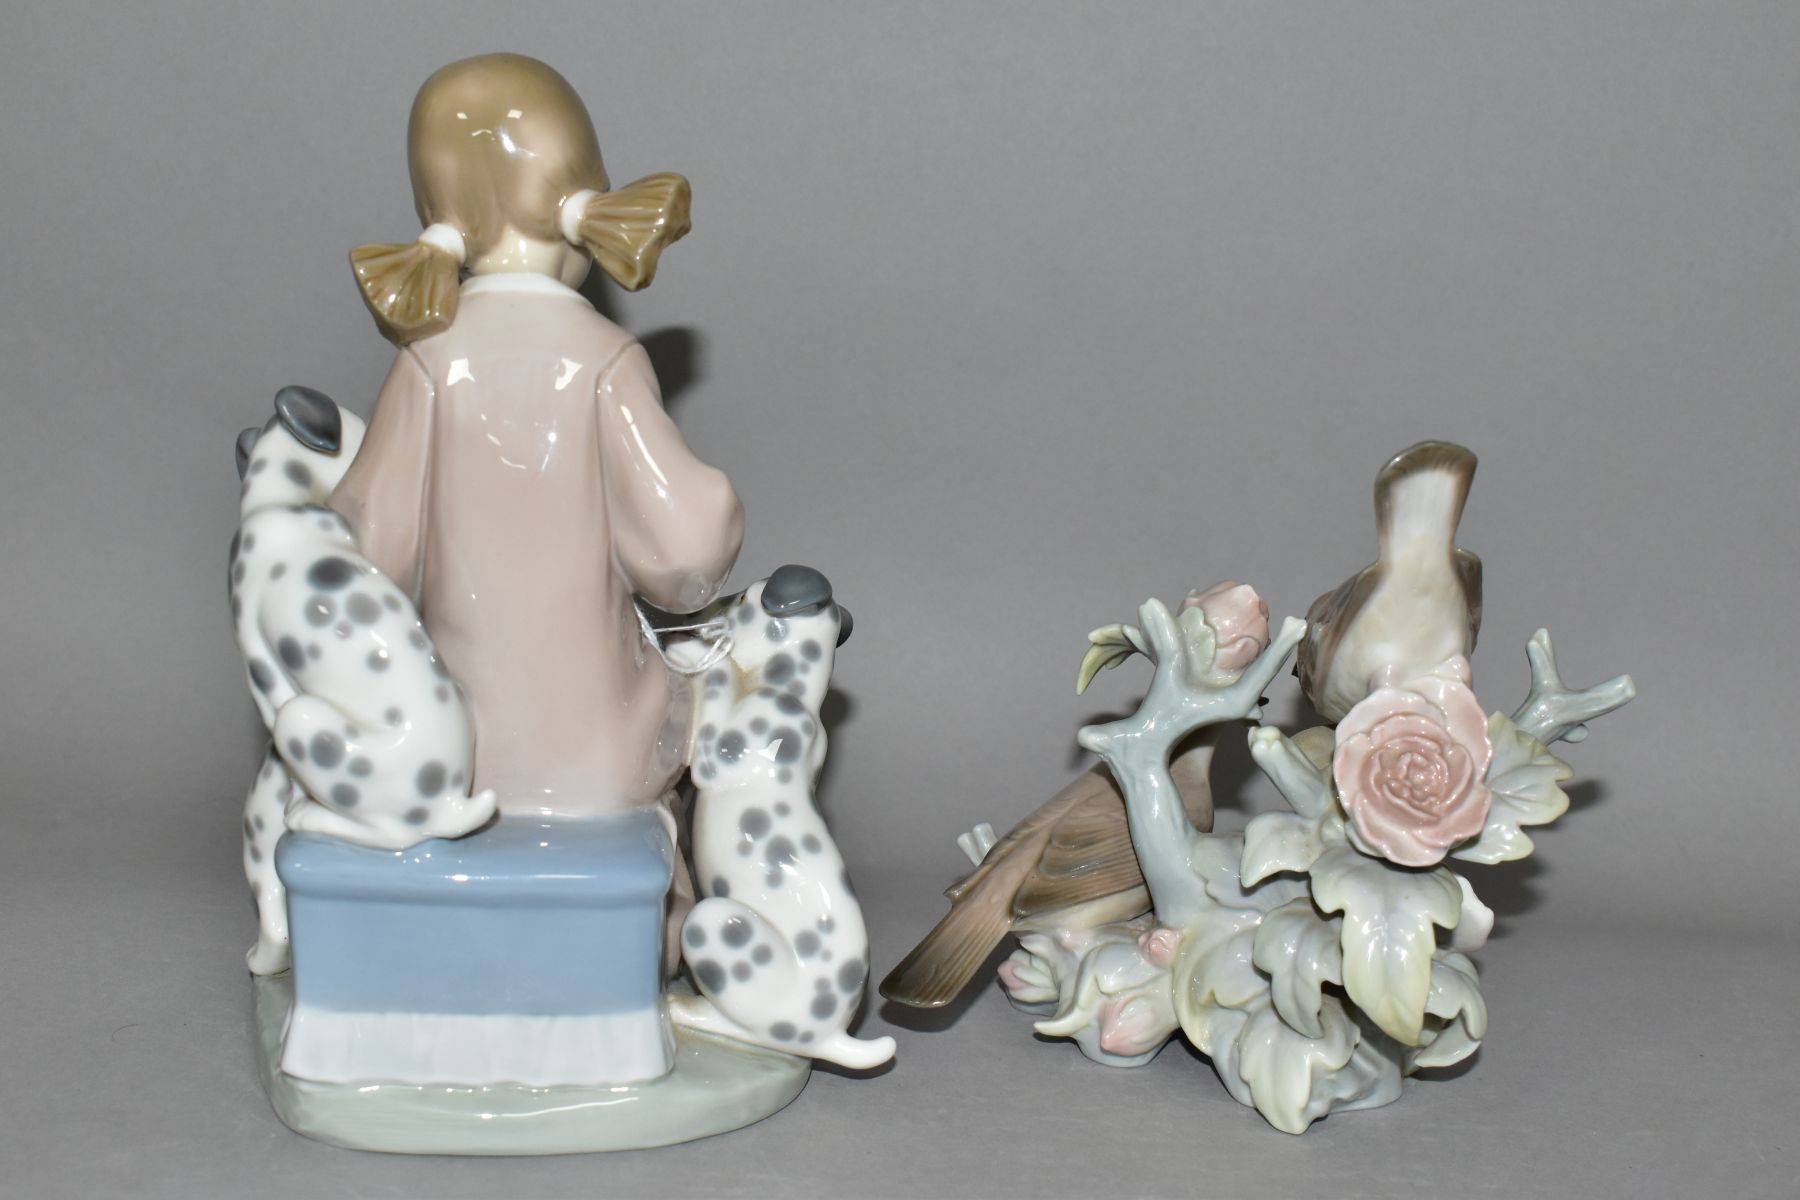 A LLADRO SCULPTURE 'THE SWEET MOUTHED' No 1248, designed by Juan Heurta in 1974, retired 1990, - Image 3 of 9